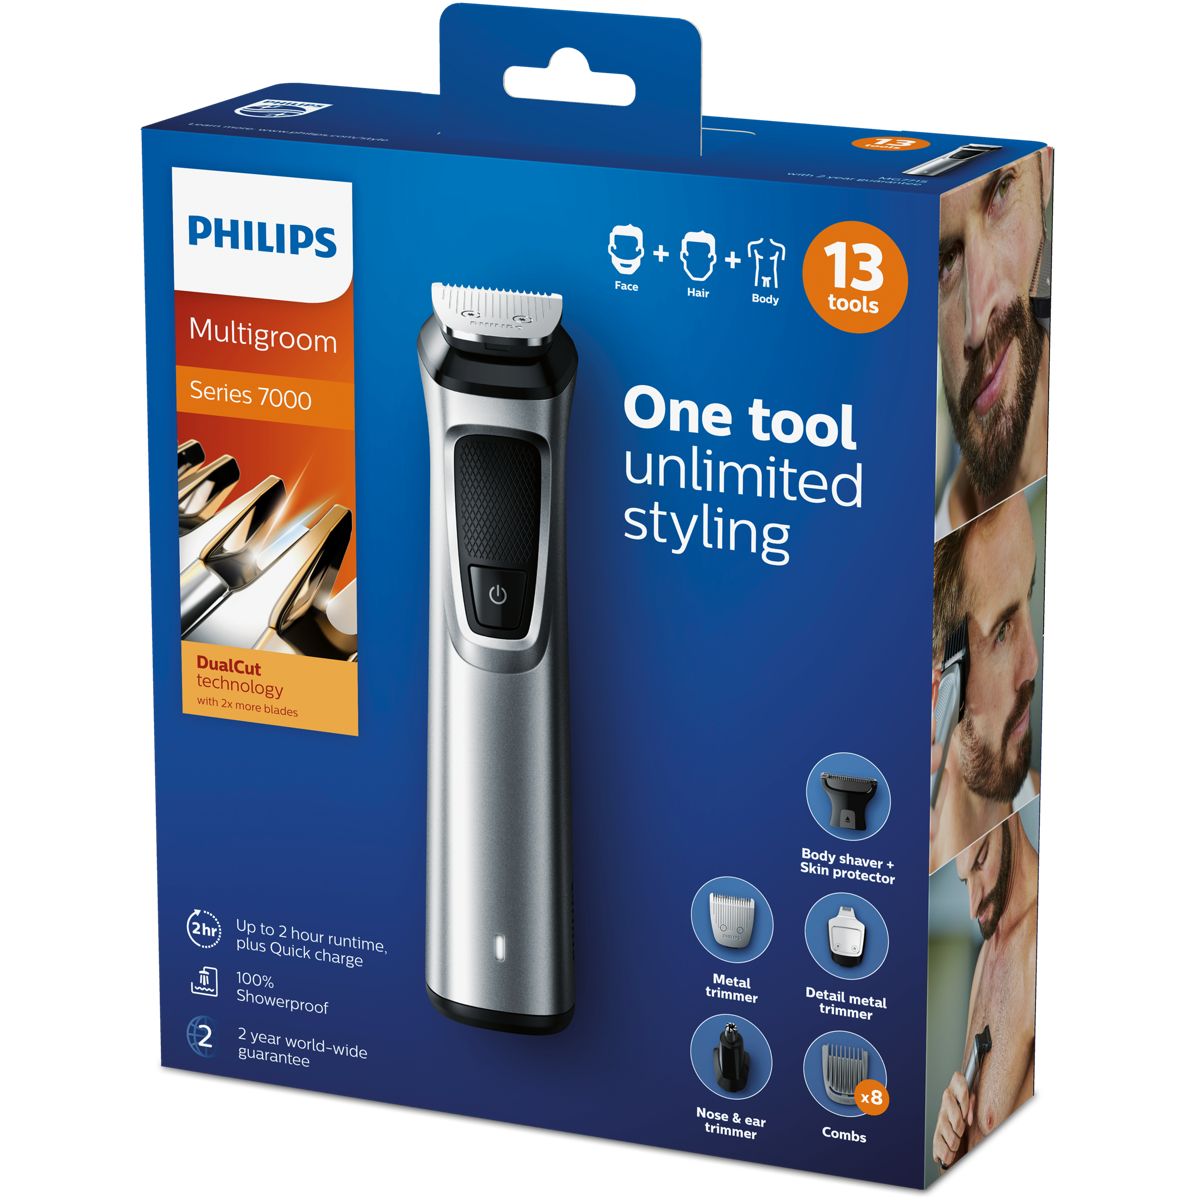 Philips Multigroom 13-in-1 Premium Trimmer for Face, Hair and Body - MG7715/15 Philips